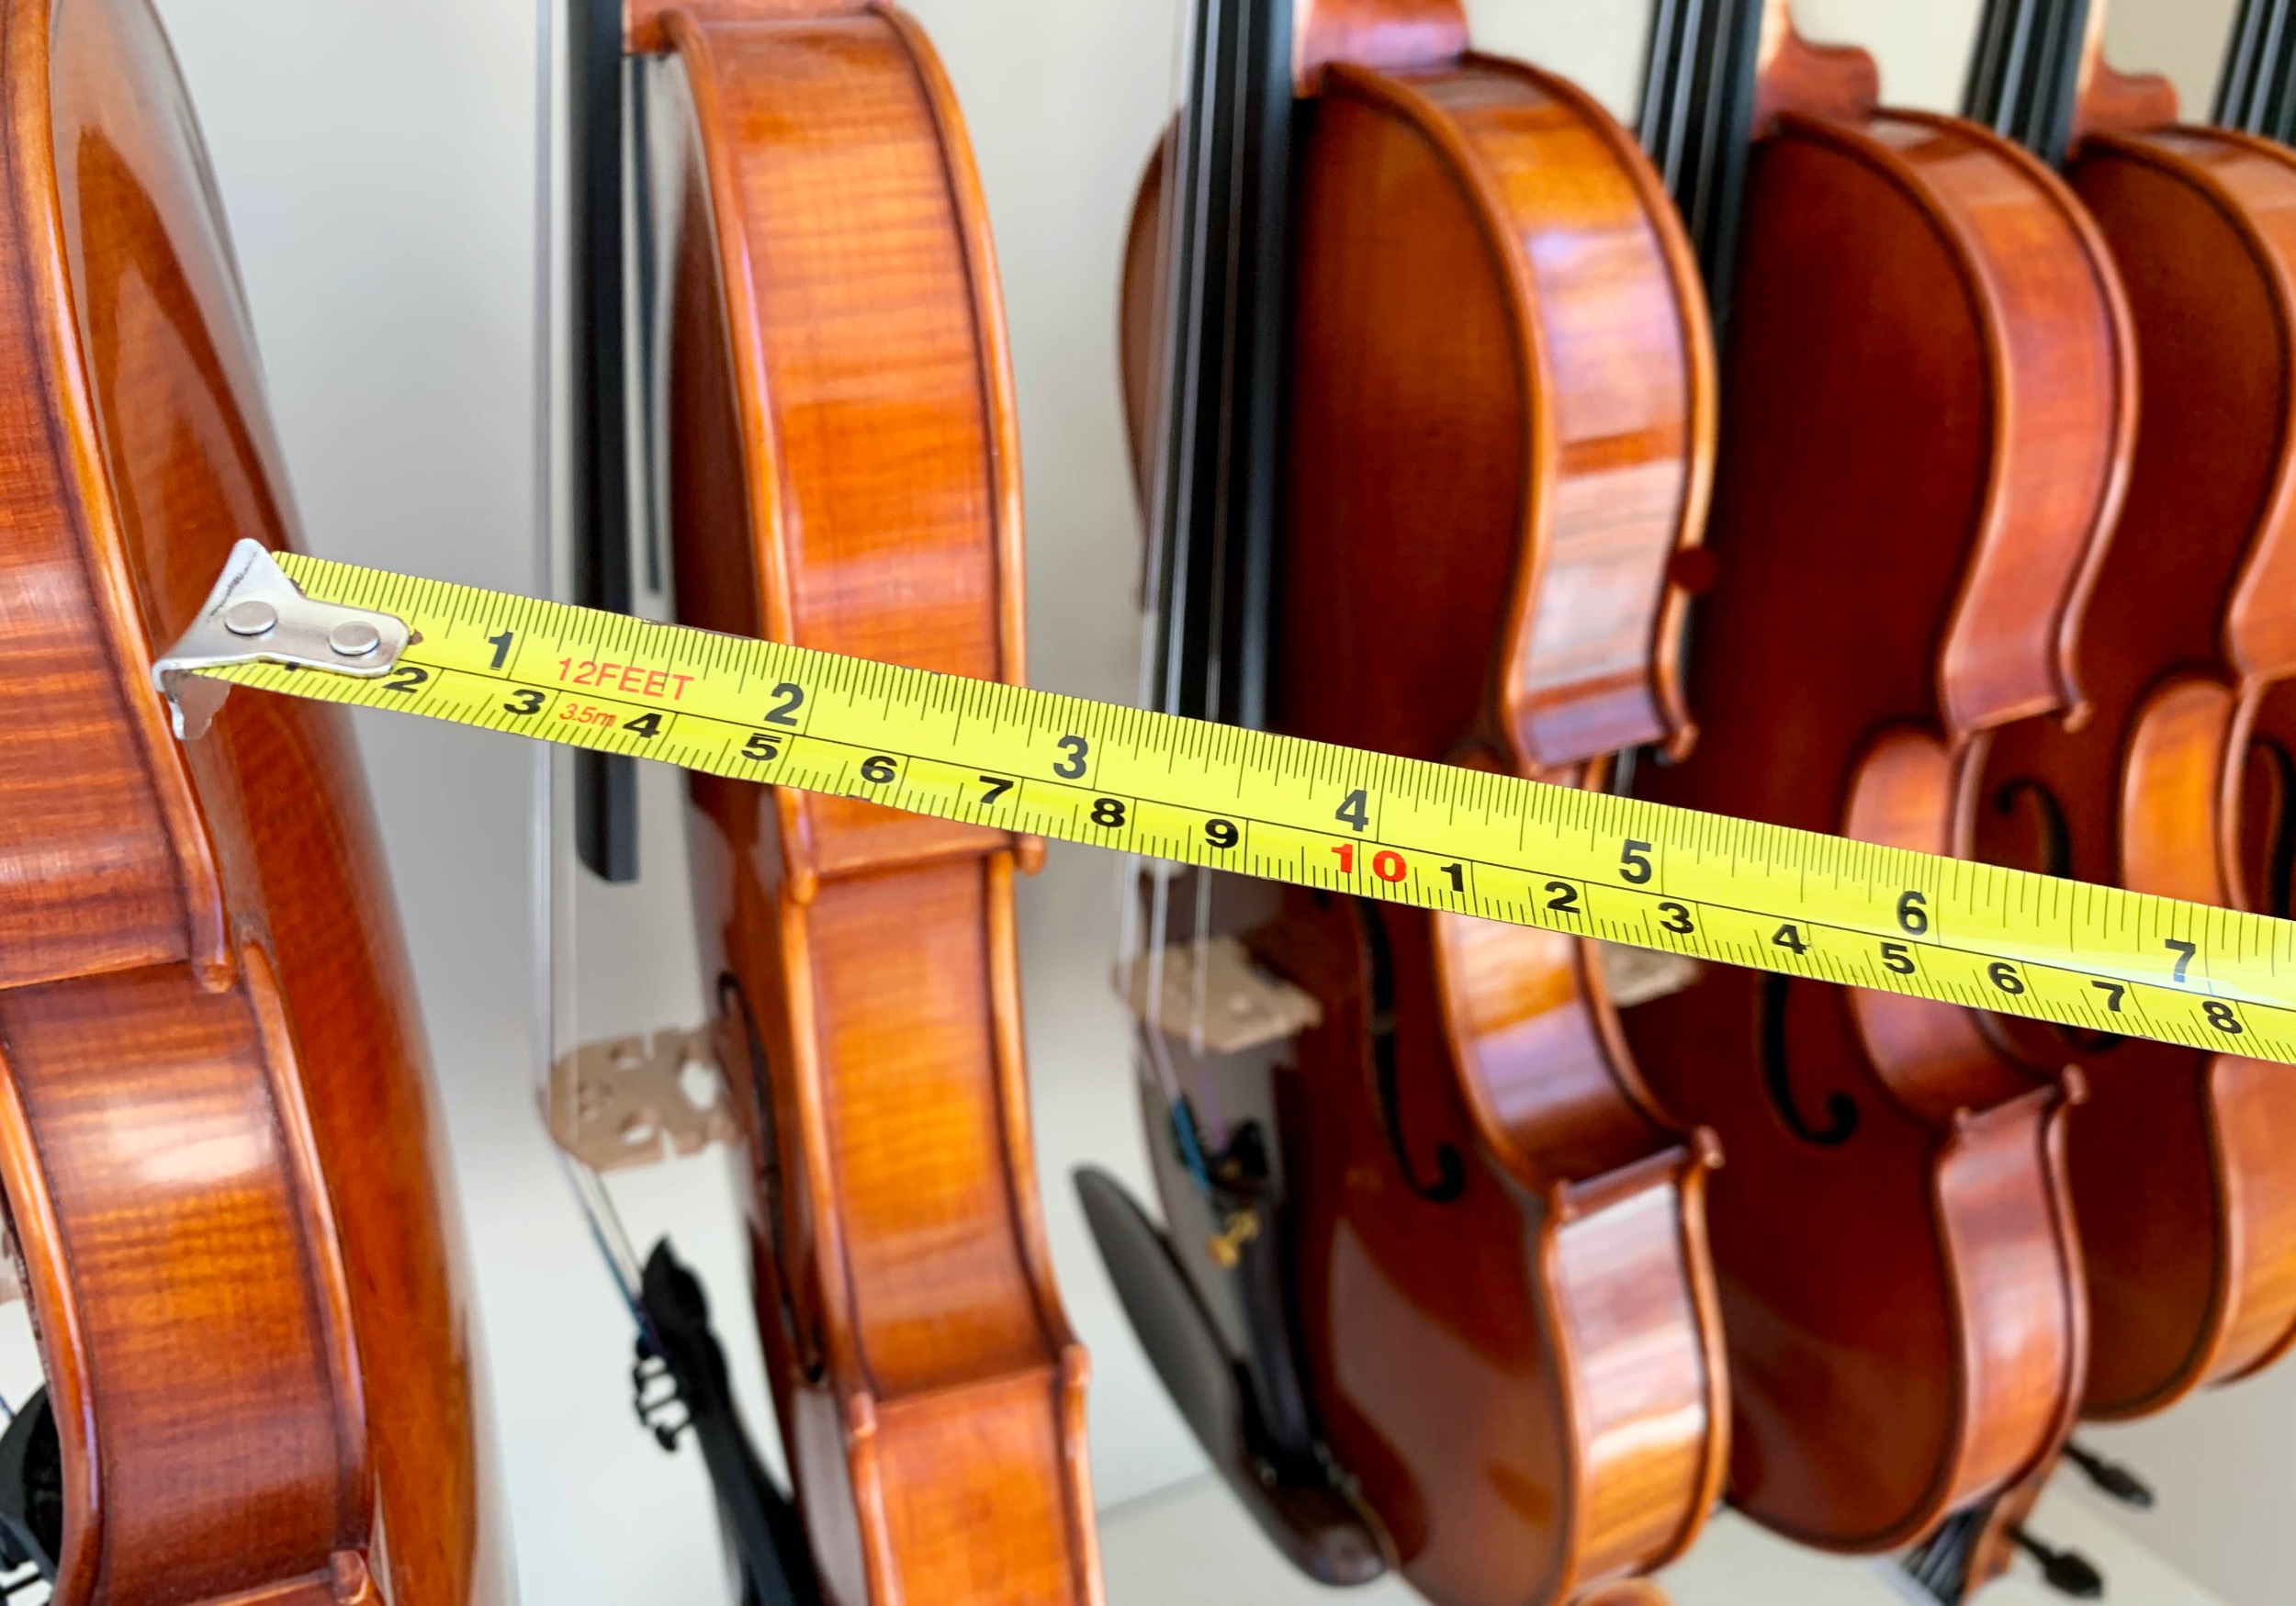 Row of violins on a wall with a yellow tape measure in the foreground